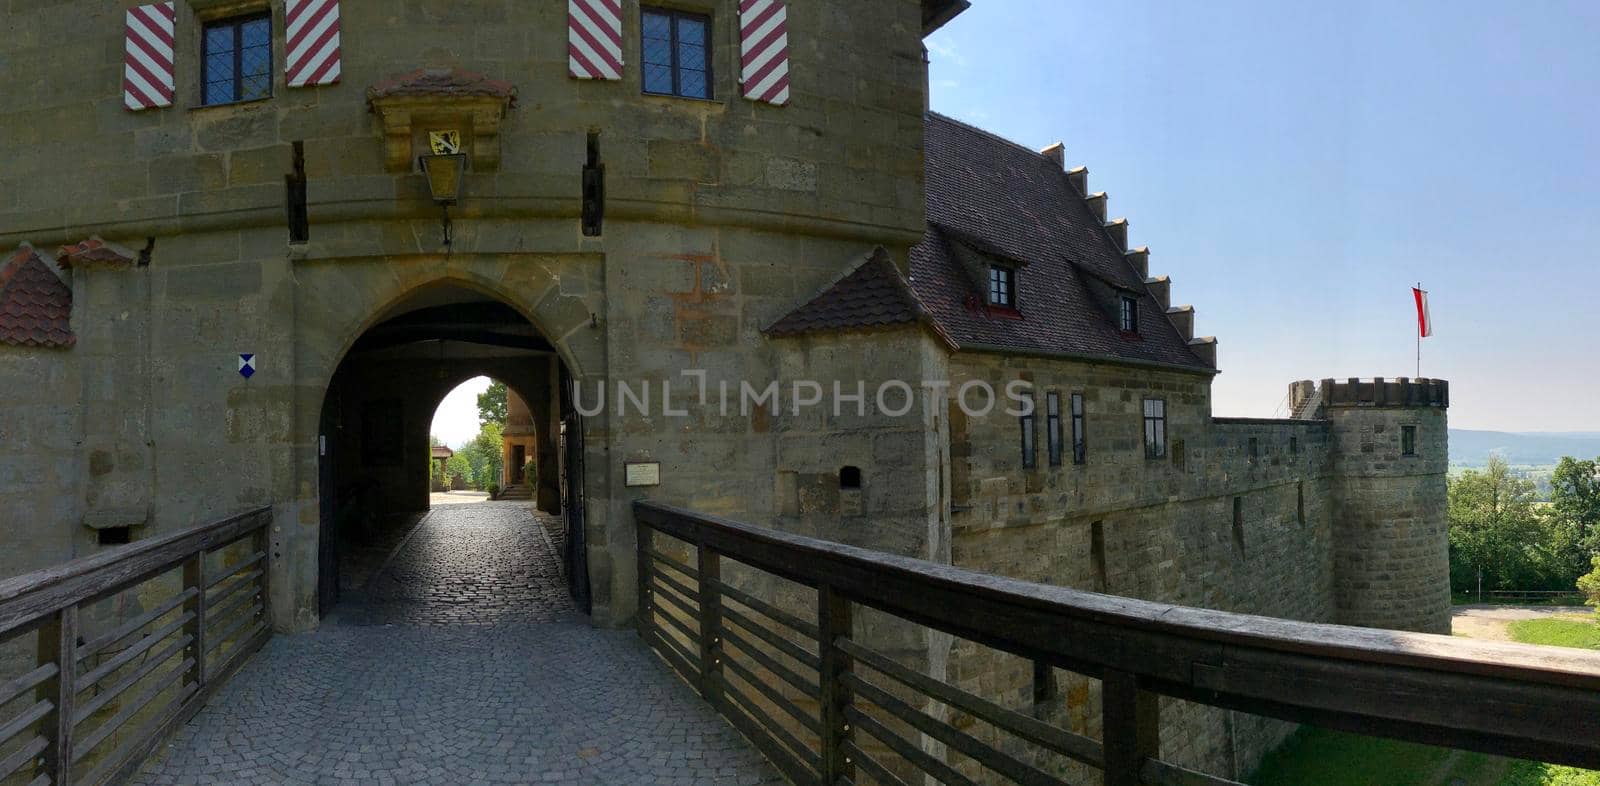 Panorama from the entrance of the Altenburg Castle in Bamberg Germany